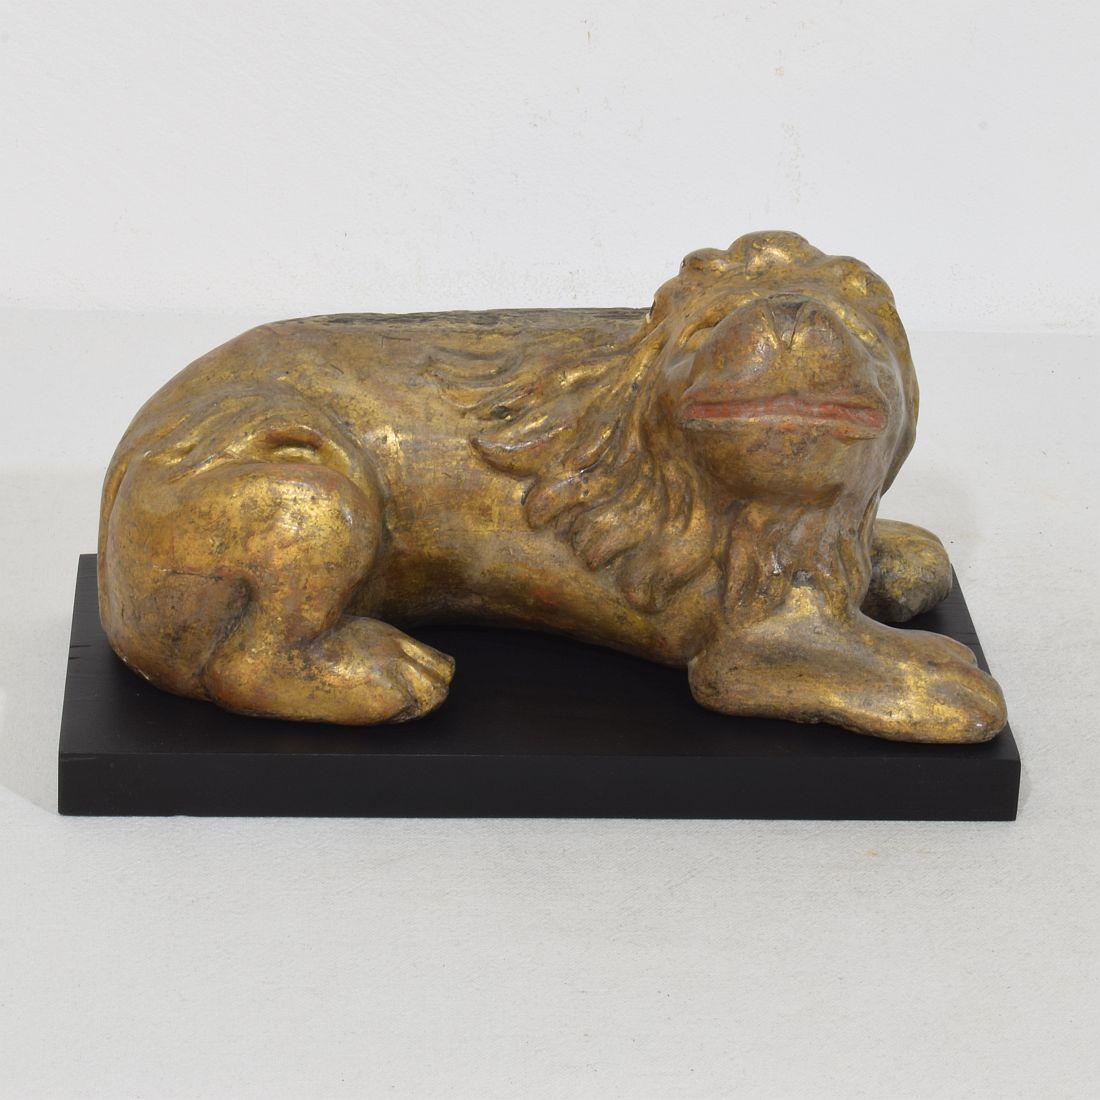 Unique period piece. Extremely rare 16th century Italian hand carved wooden lion. Most likely once part of a piece of furniture. Beautifully carved in a simple folk art way with traces of its original gilding. Italy circa 1500-1600. Weathered and